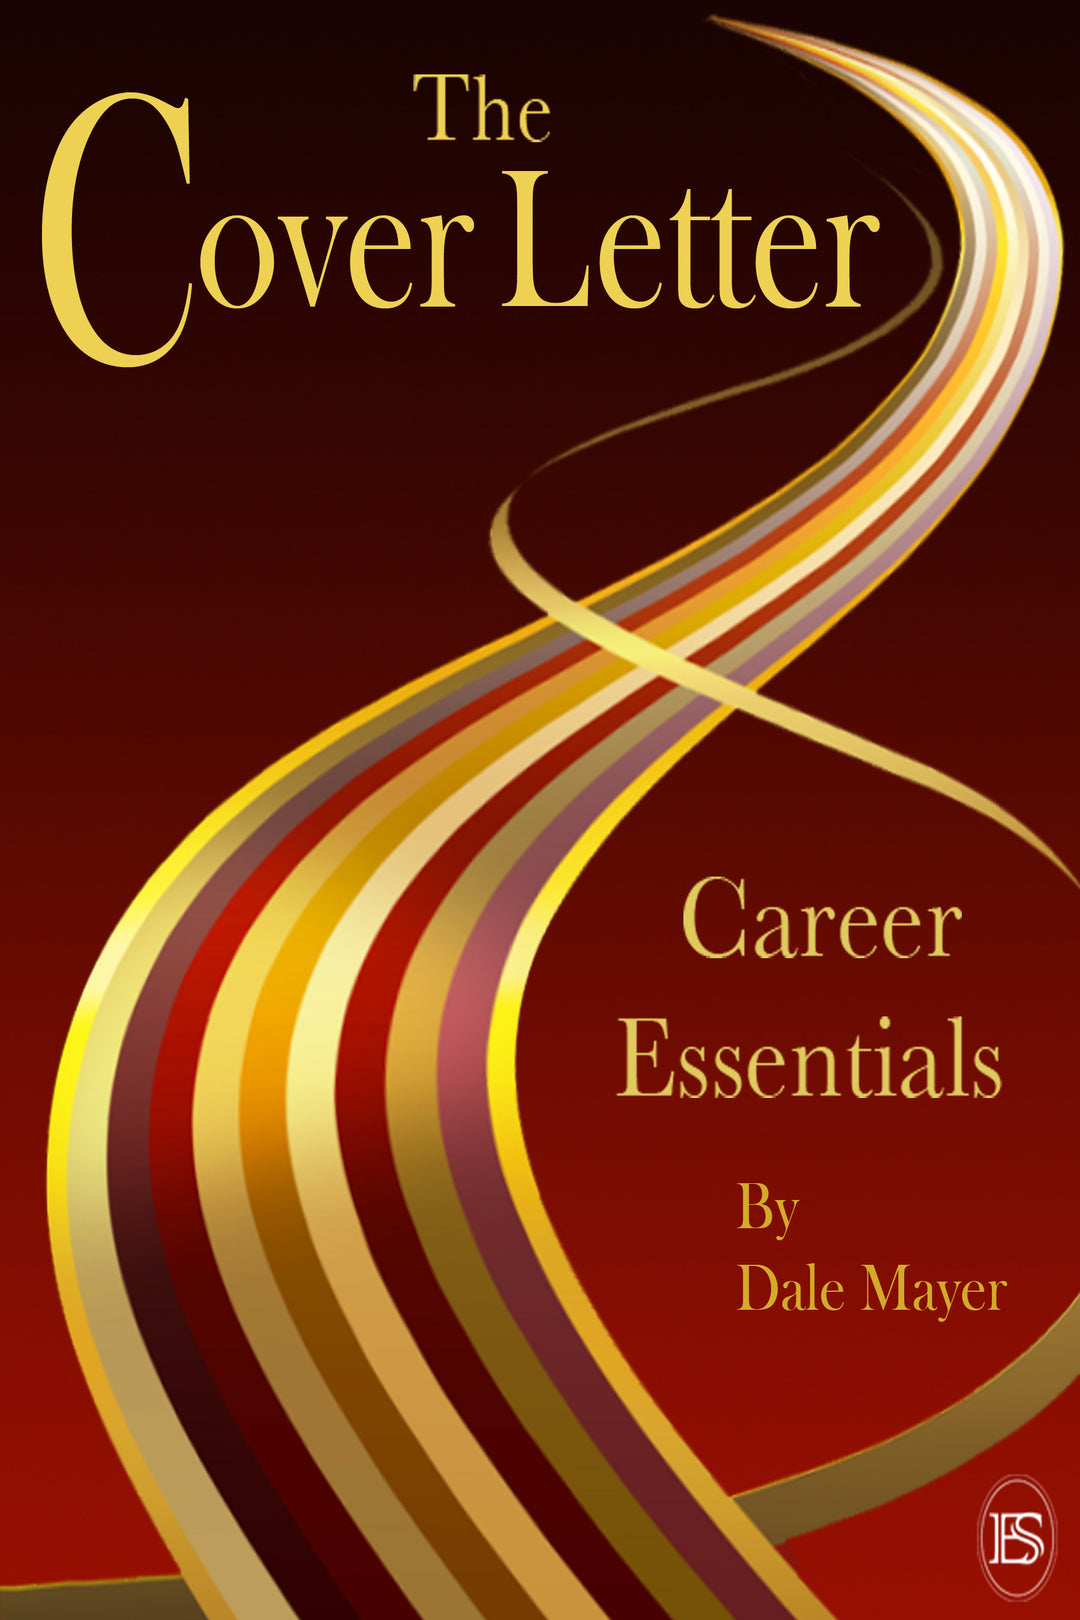 The Cover Letter: Career Essentials Book 2 by Dale Mayer